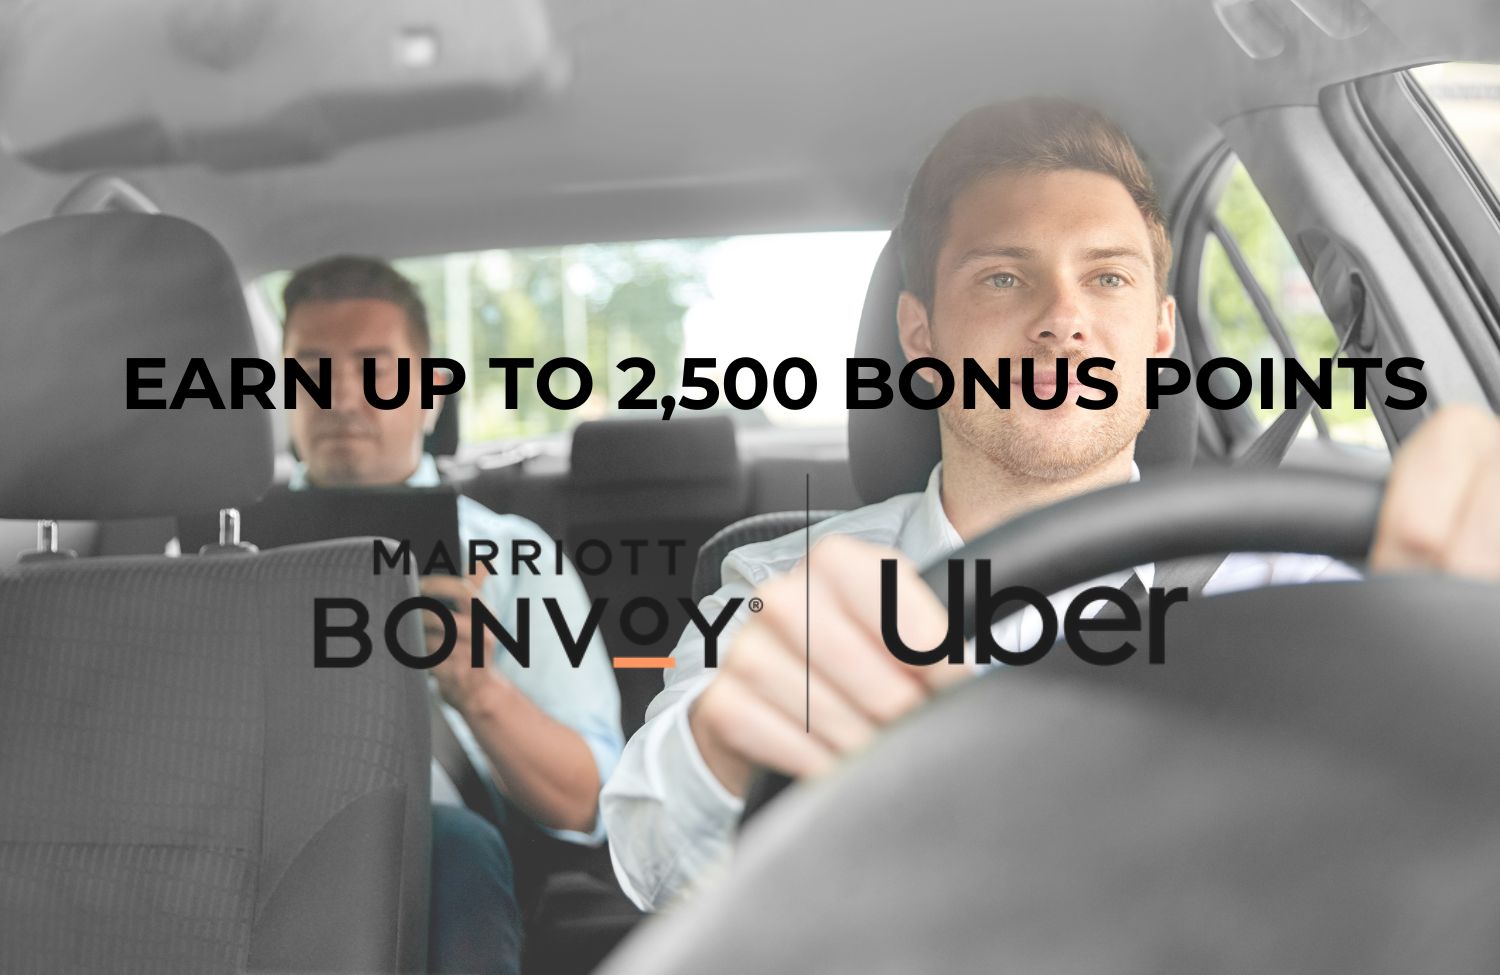 earn up to 2500 bonus points by linking marriott account with uber account